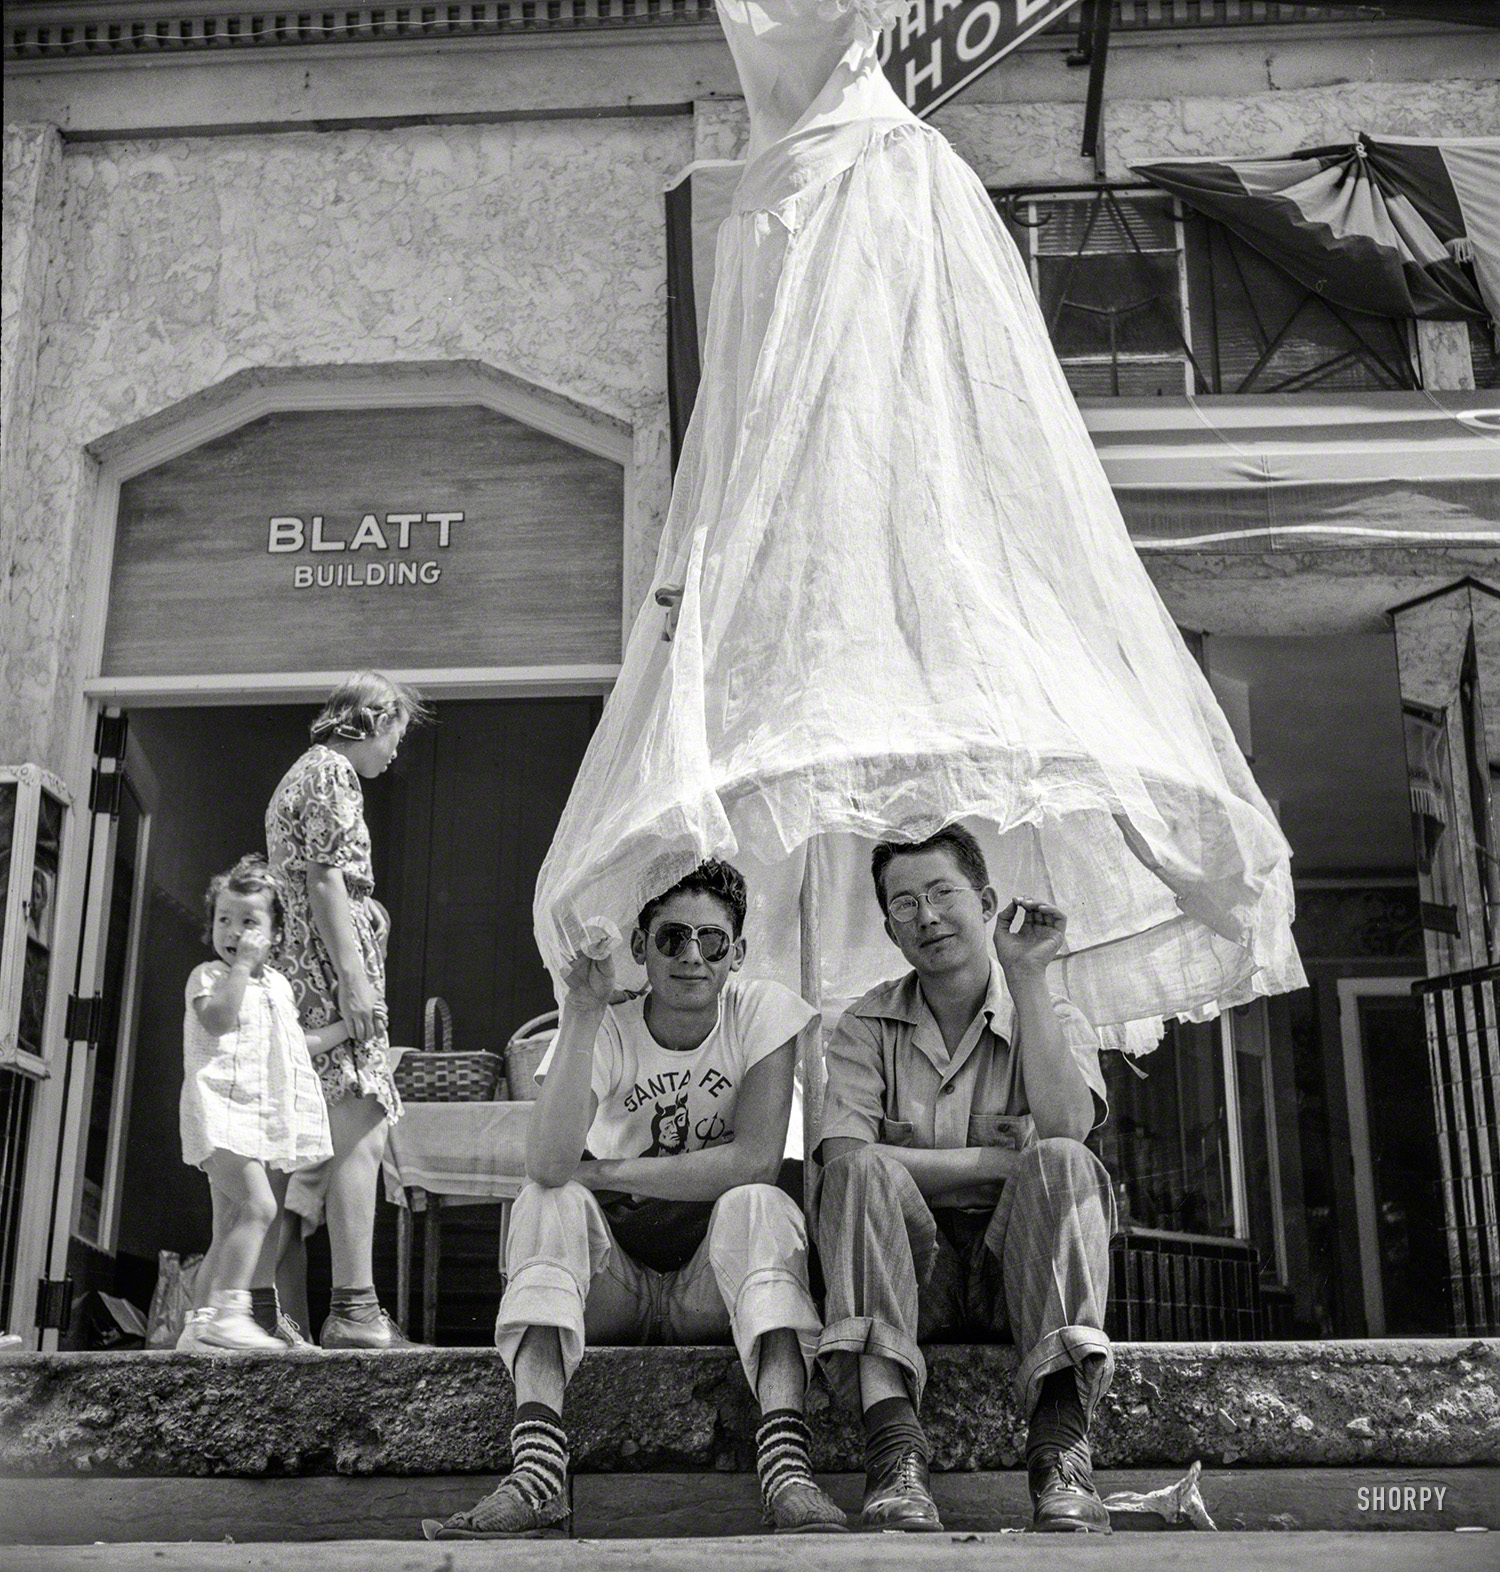 July 1940. "Street scene at the fiesta in Santa Fe, New Mexico." Our third look at the festive goings-on here, and we'll let someone else explain the skirt-brella. Photo by Russell Lee for the Farm Security Administration. View full size.